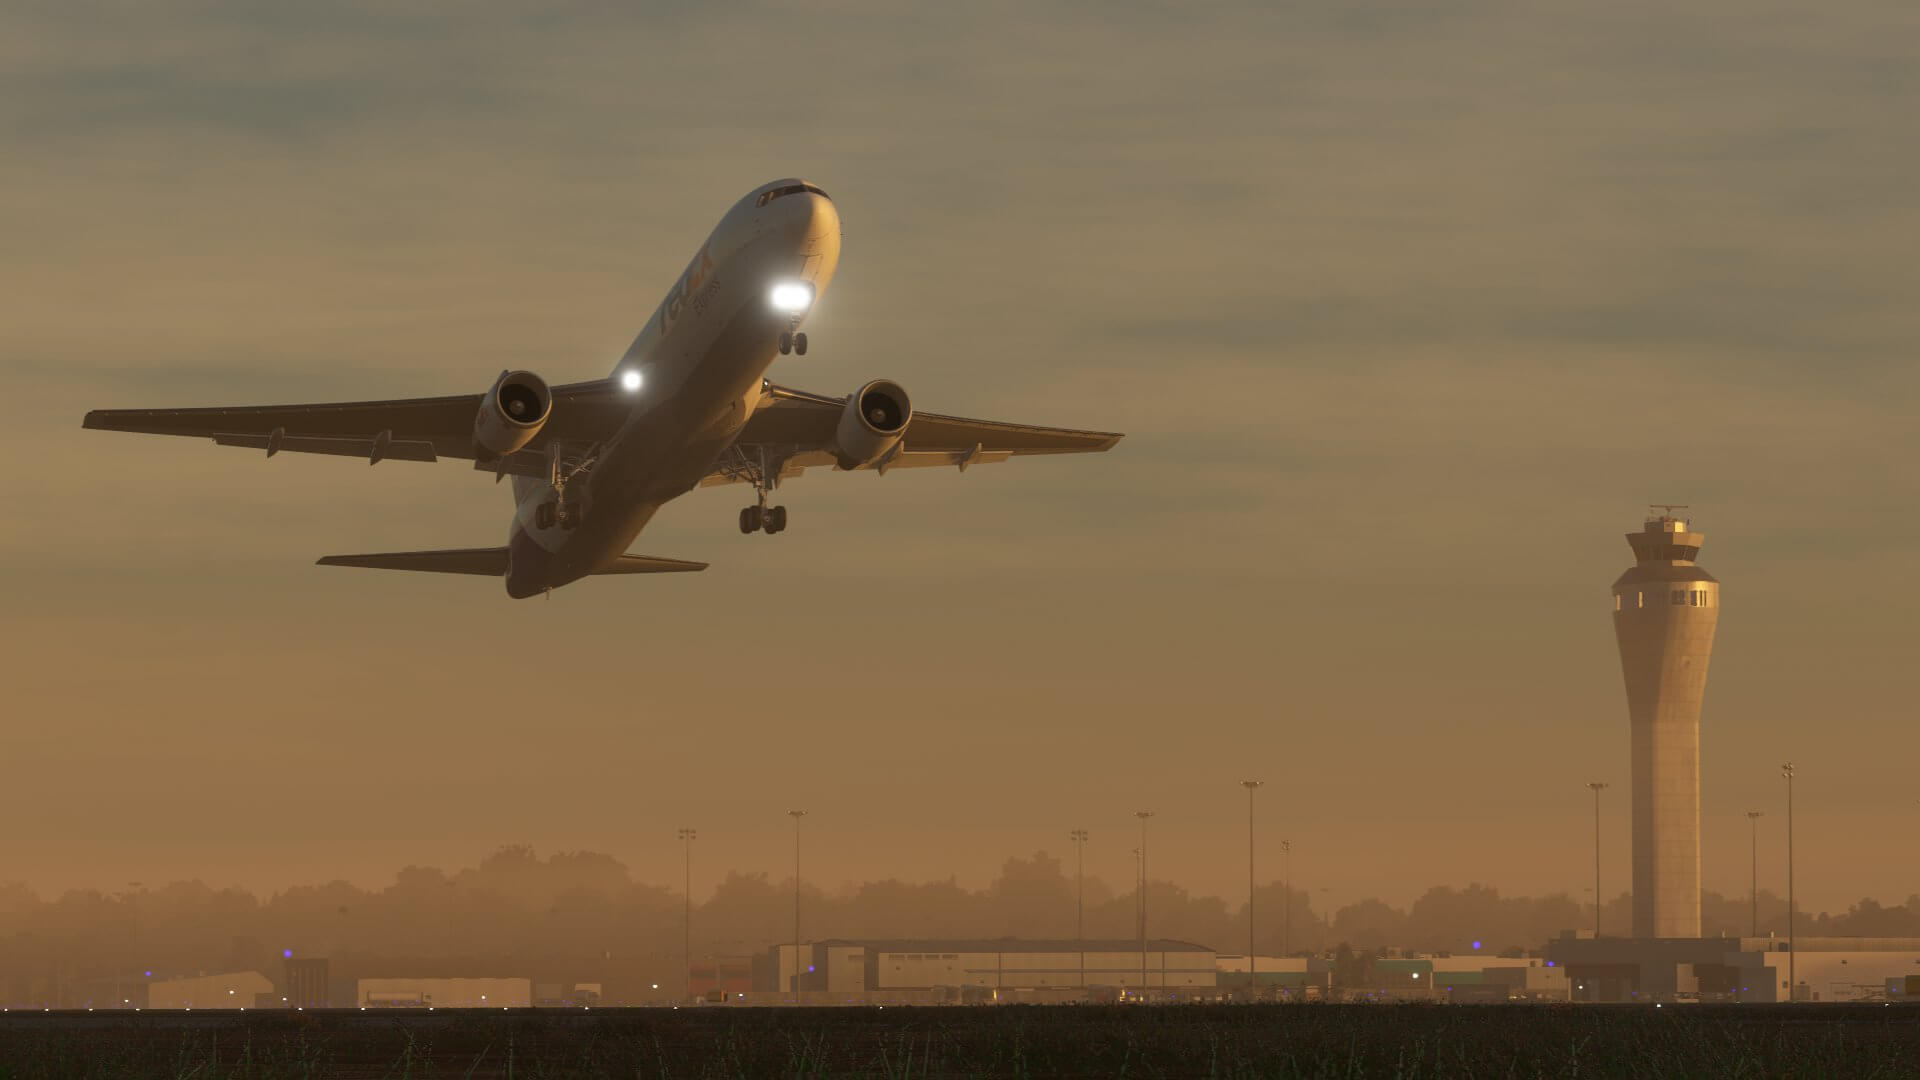 A FedEx Boeing 777 takes off from an international airport hub.